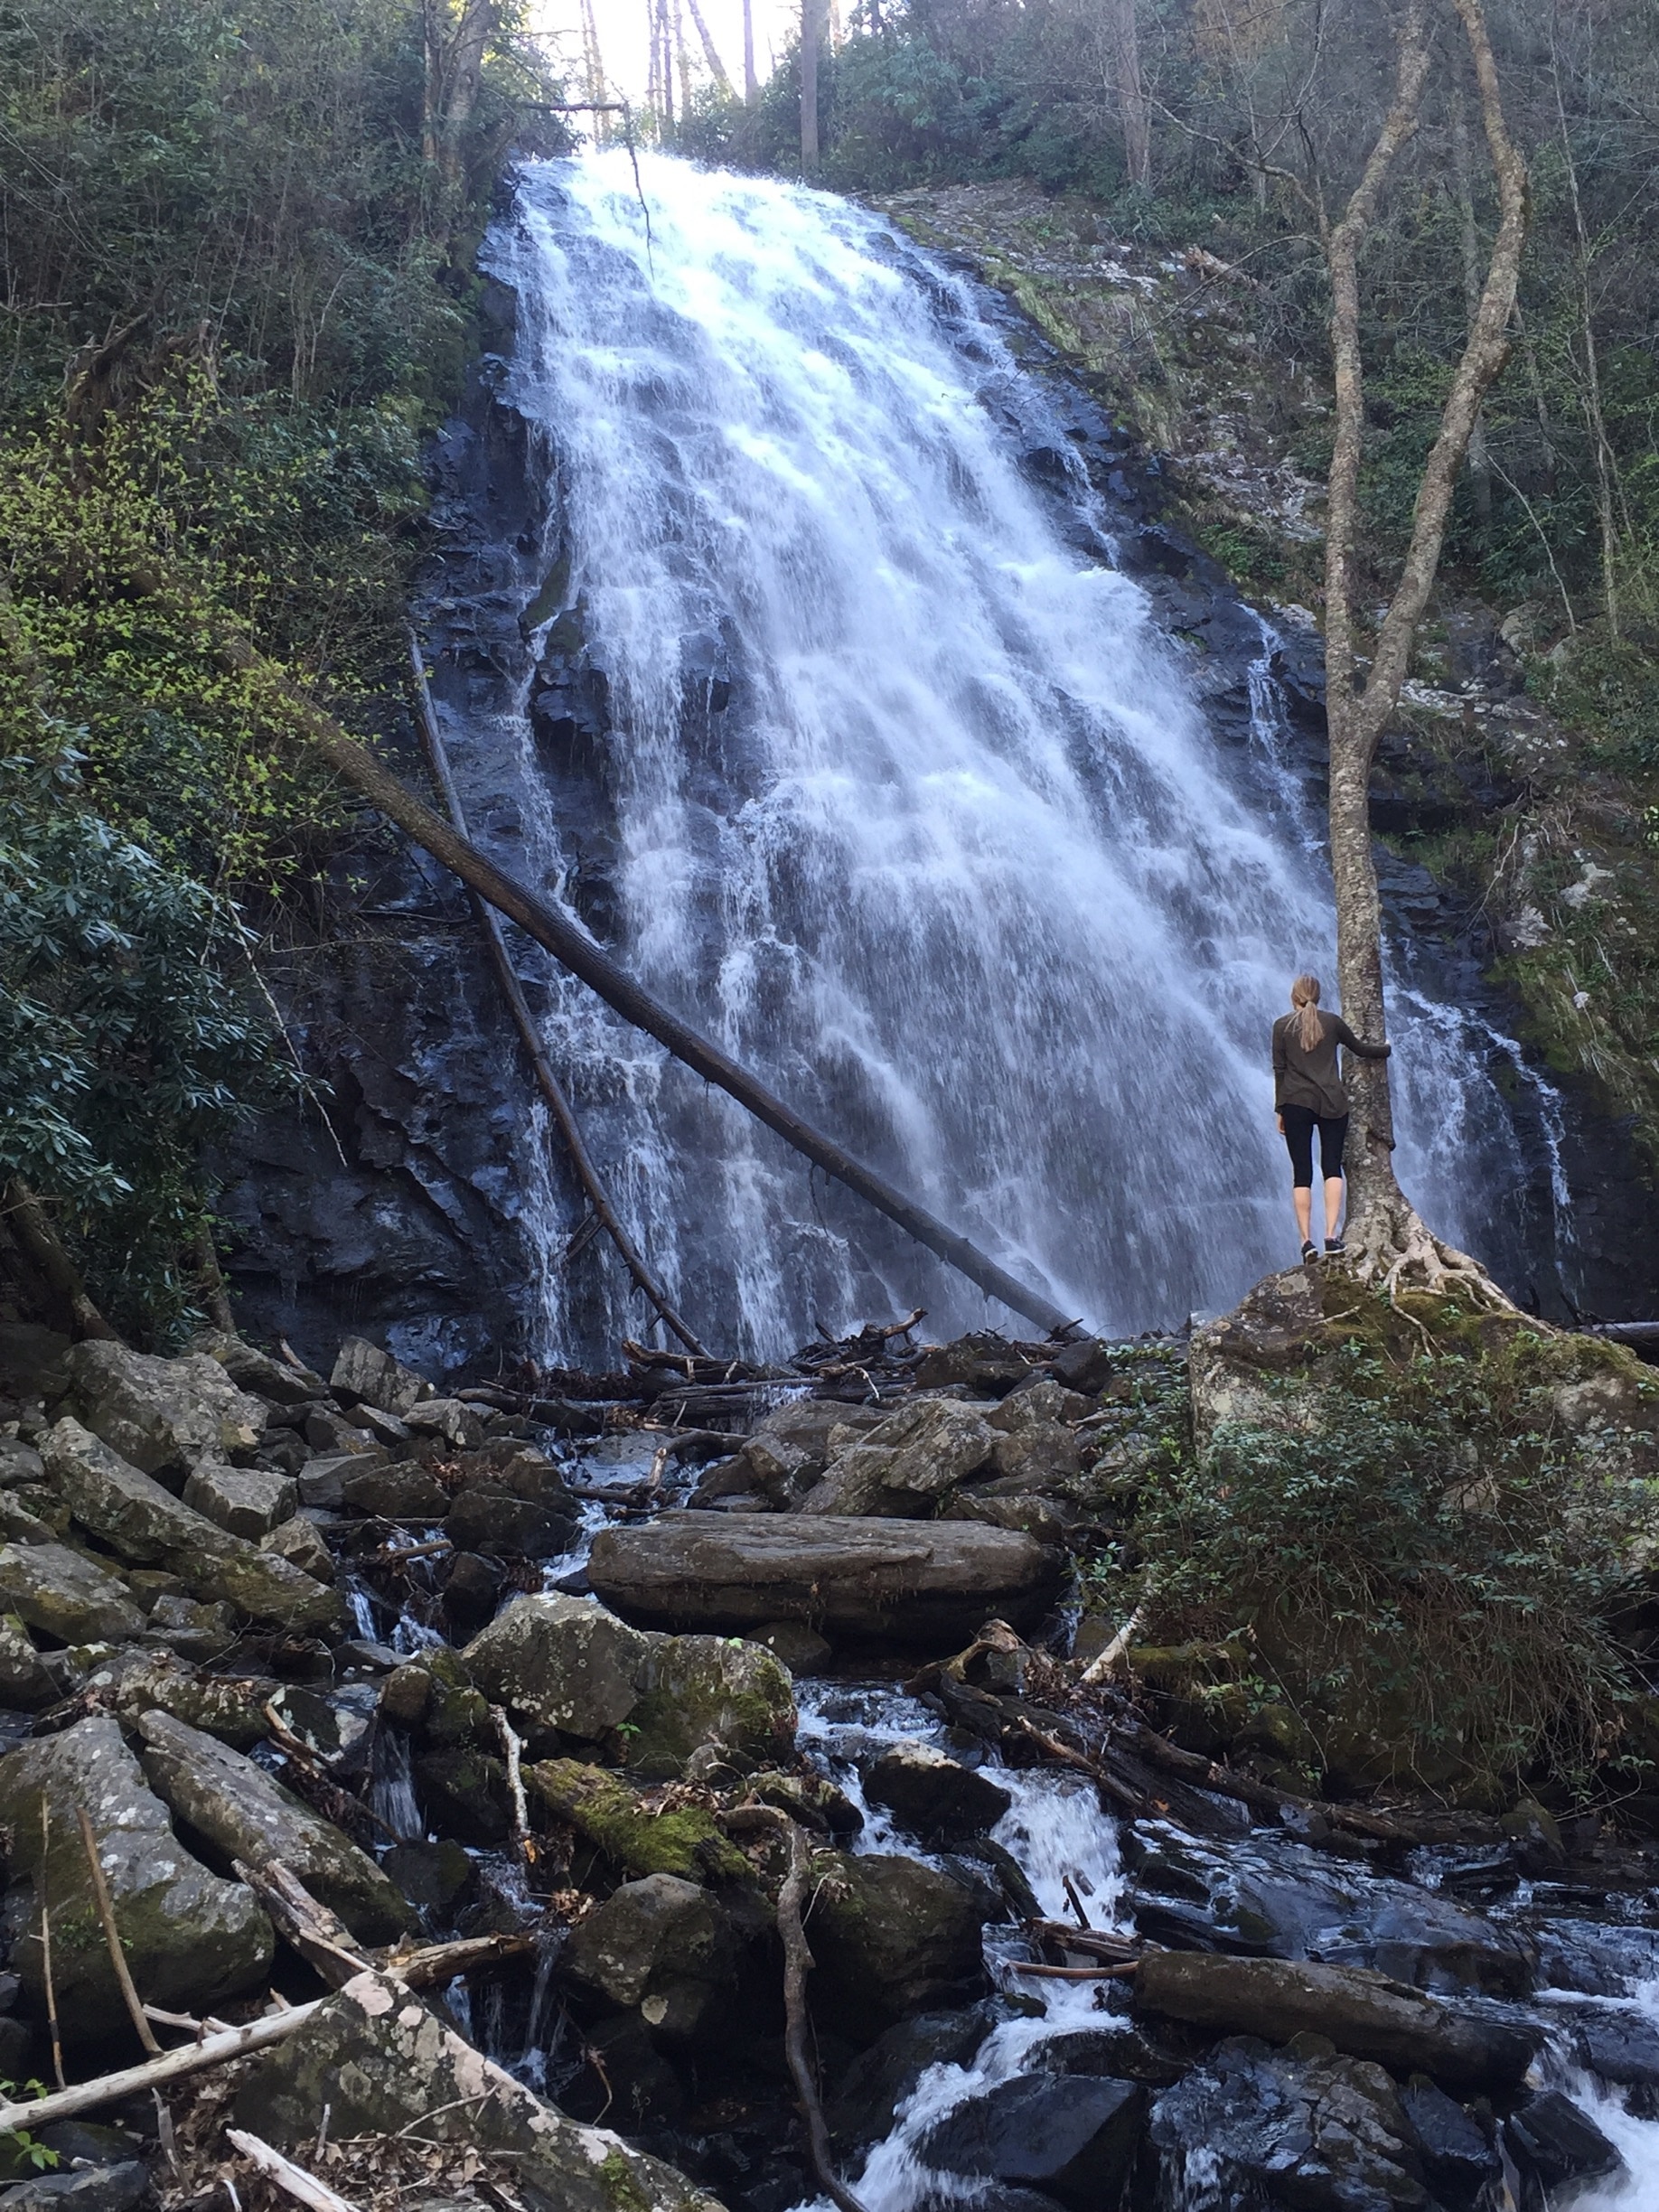 Crabtree falls, just off the Blue Ridge Parkway